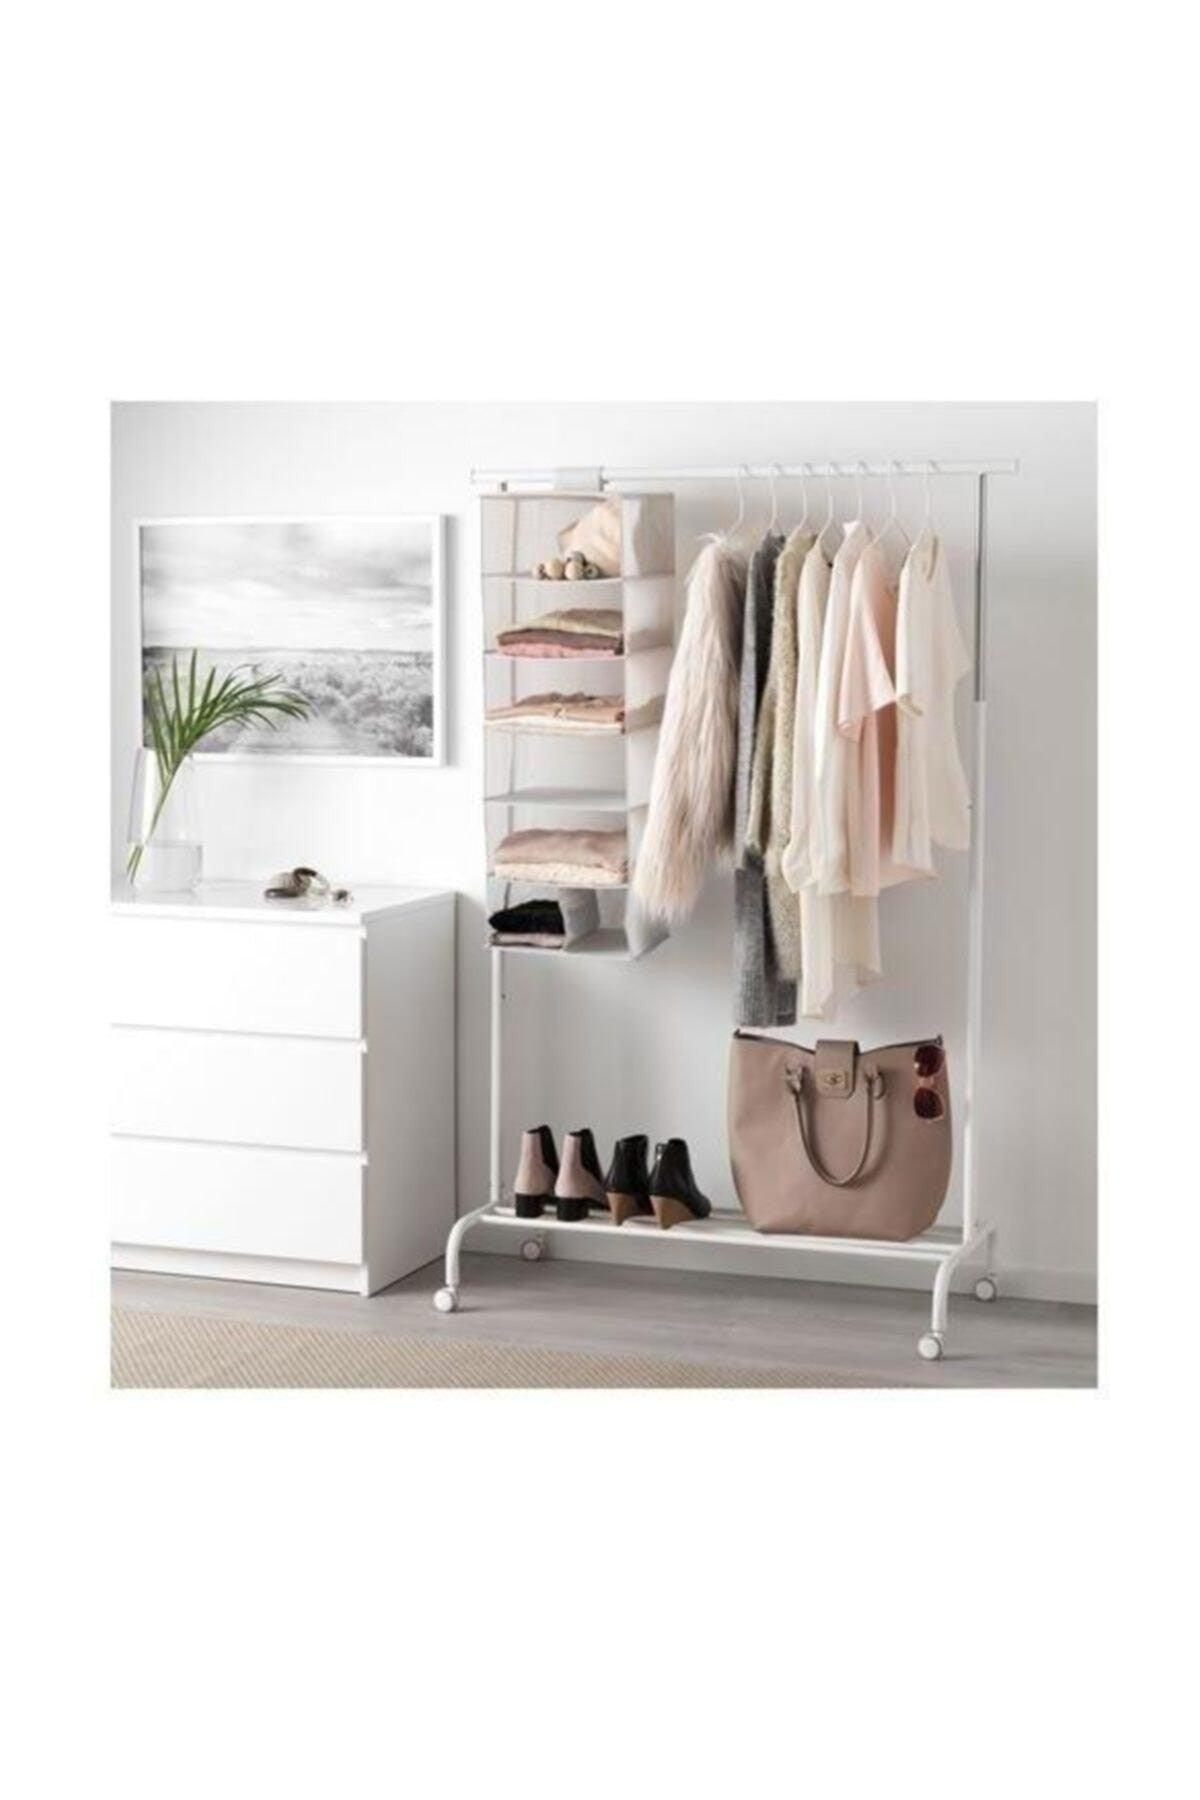 Stuk Cabinet With Hanging Compartments Or Hanger